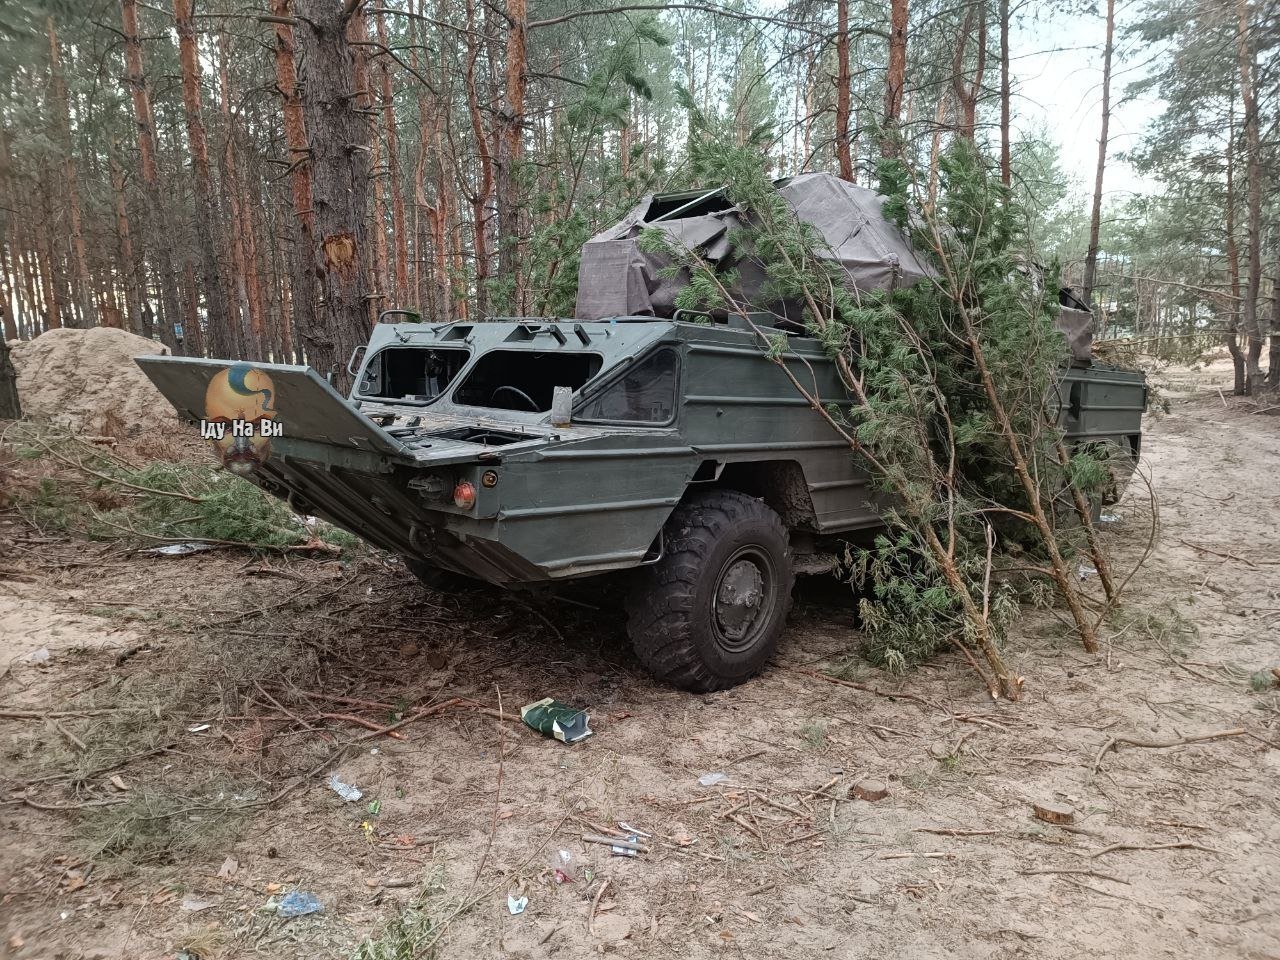 A Russian 9T217 transloader for the 9K33 Osa SAM system along with 17 9M33M3 surface-to-air missiles were captured by the Ukrainian army in Kharkiv Oblast , Defense Express